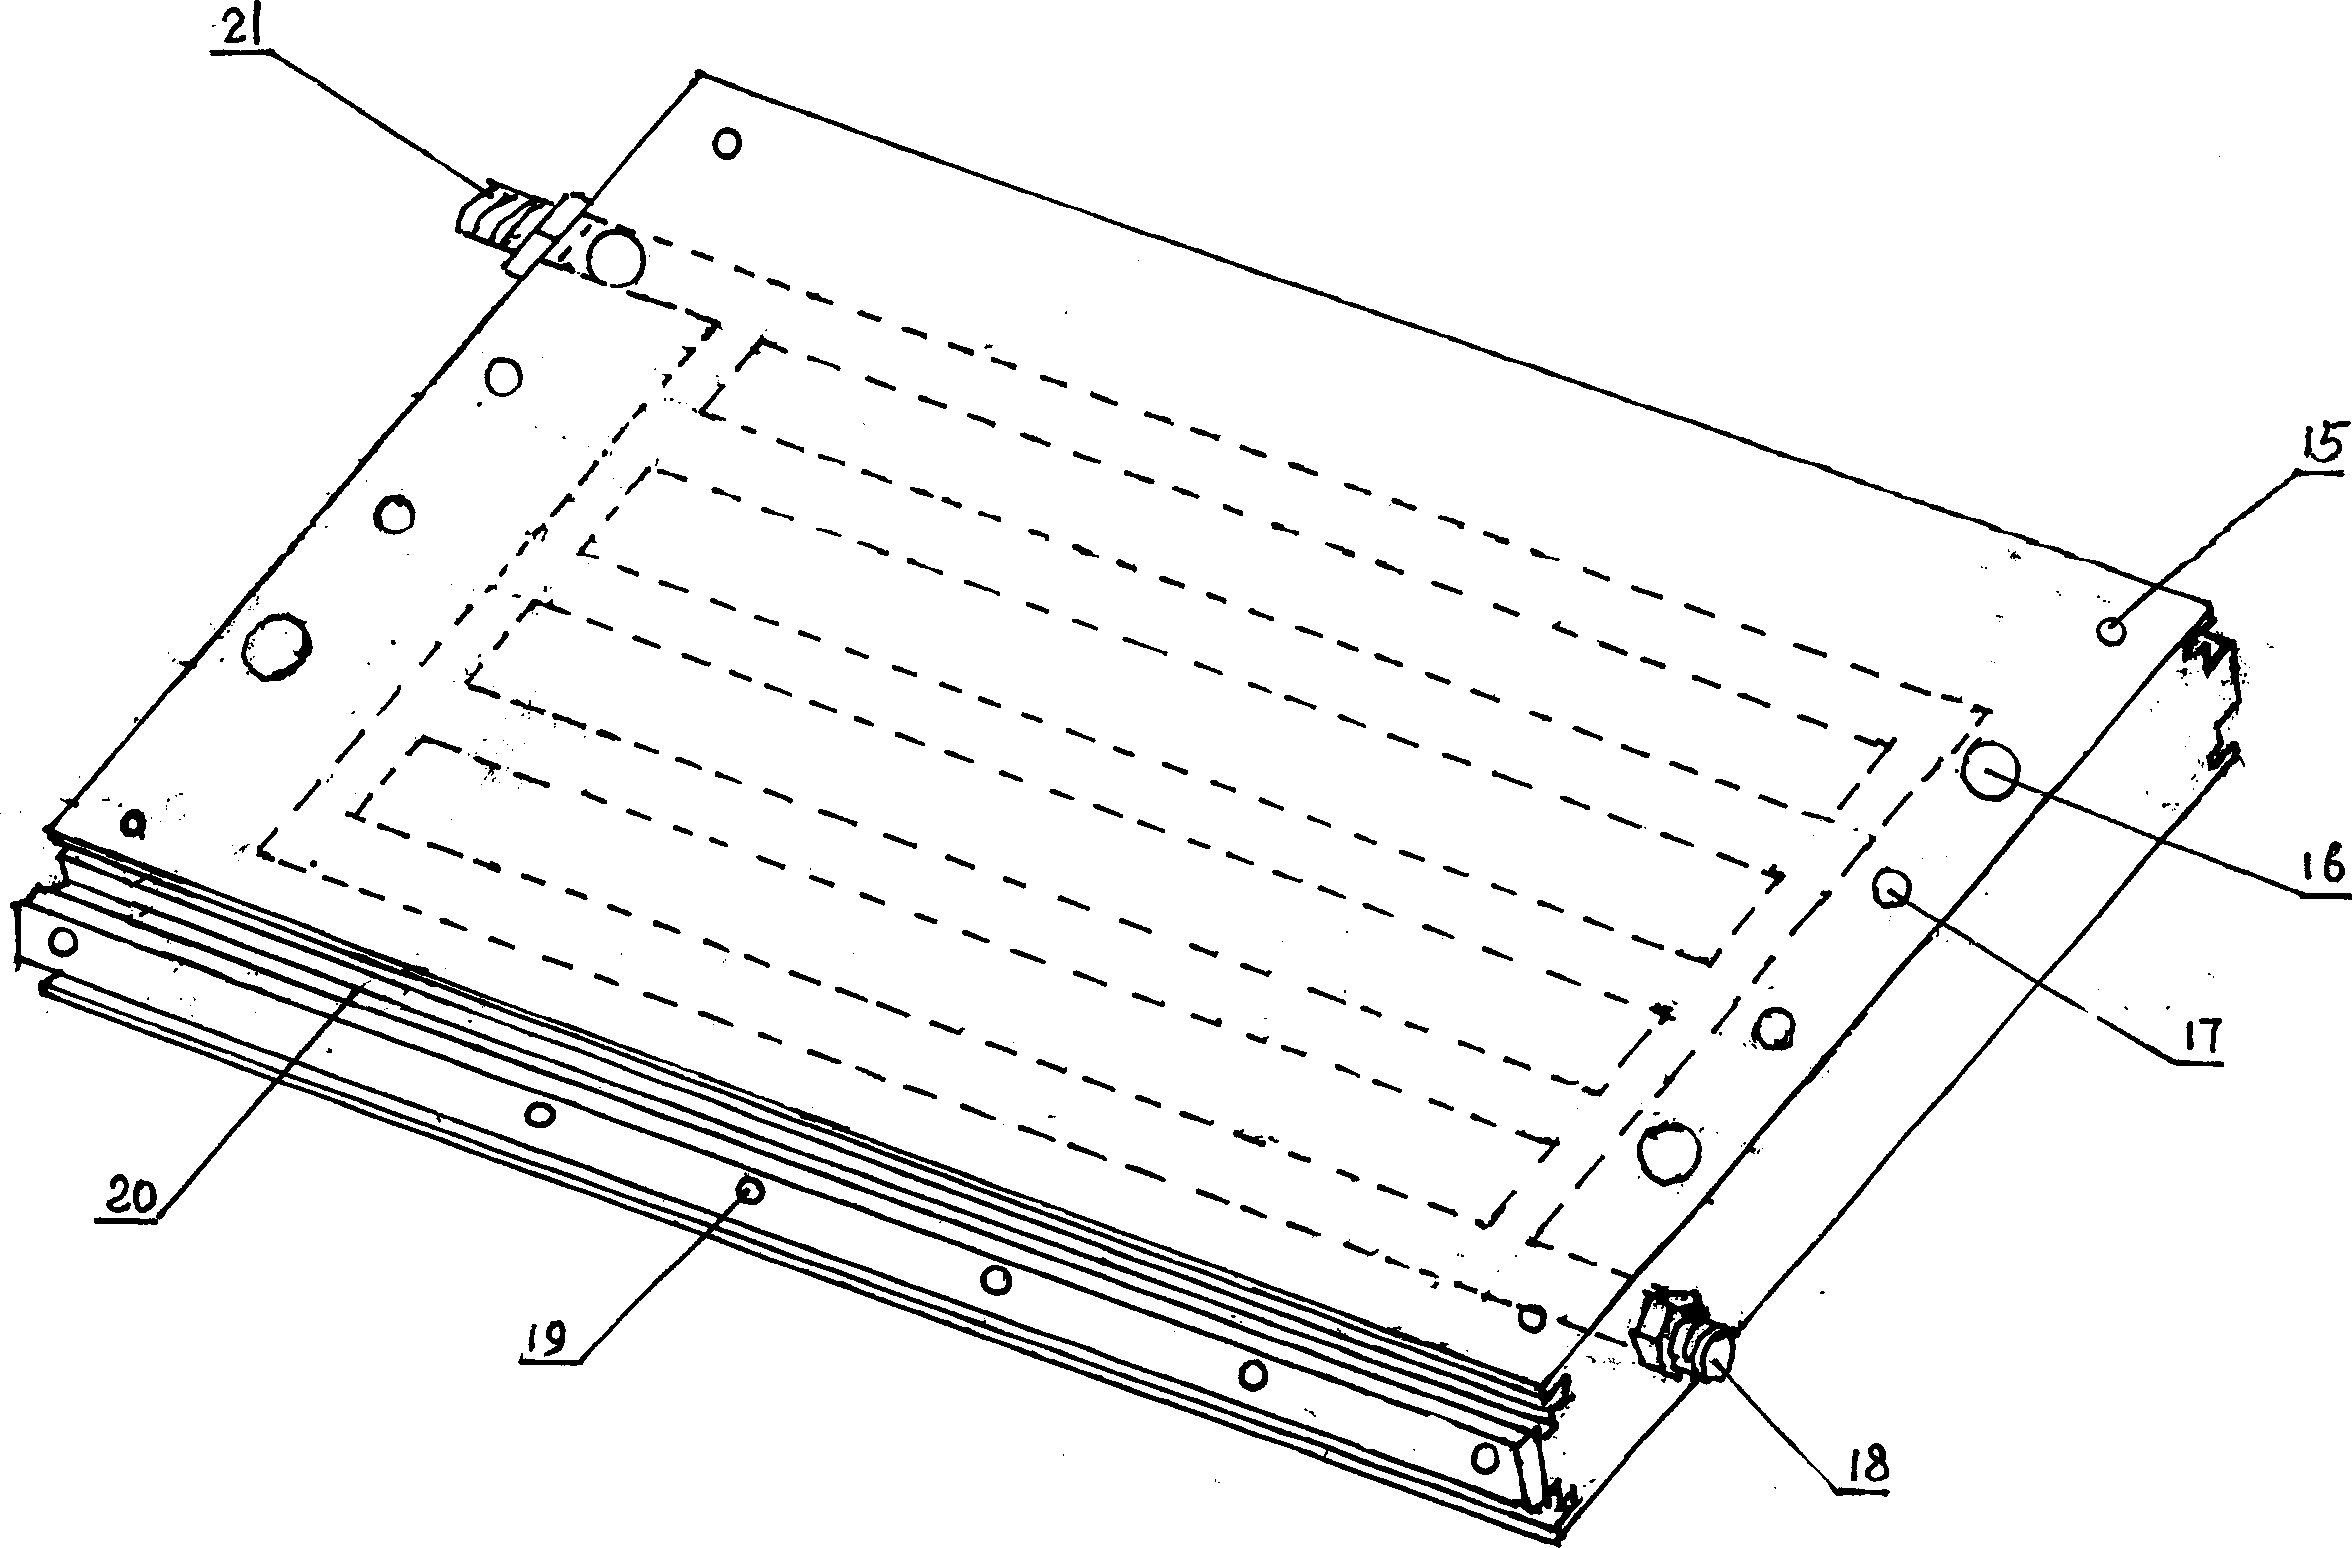 Composition board type high-frequency large-scale ozone generator